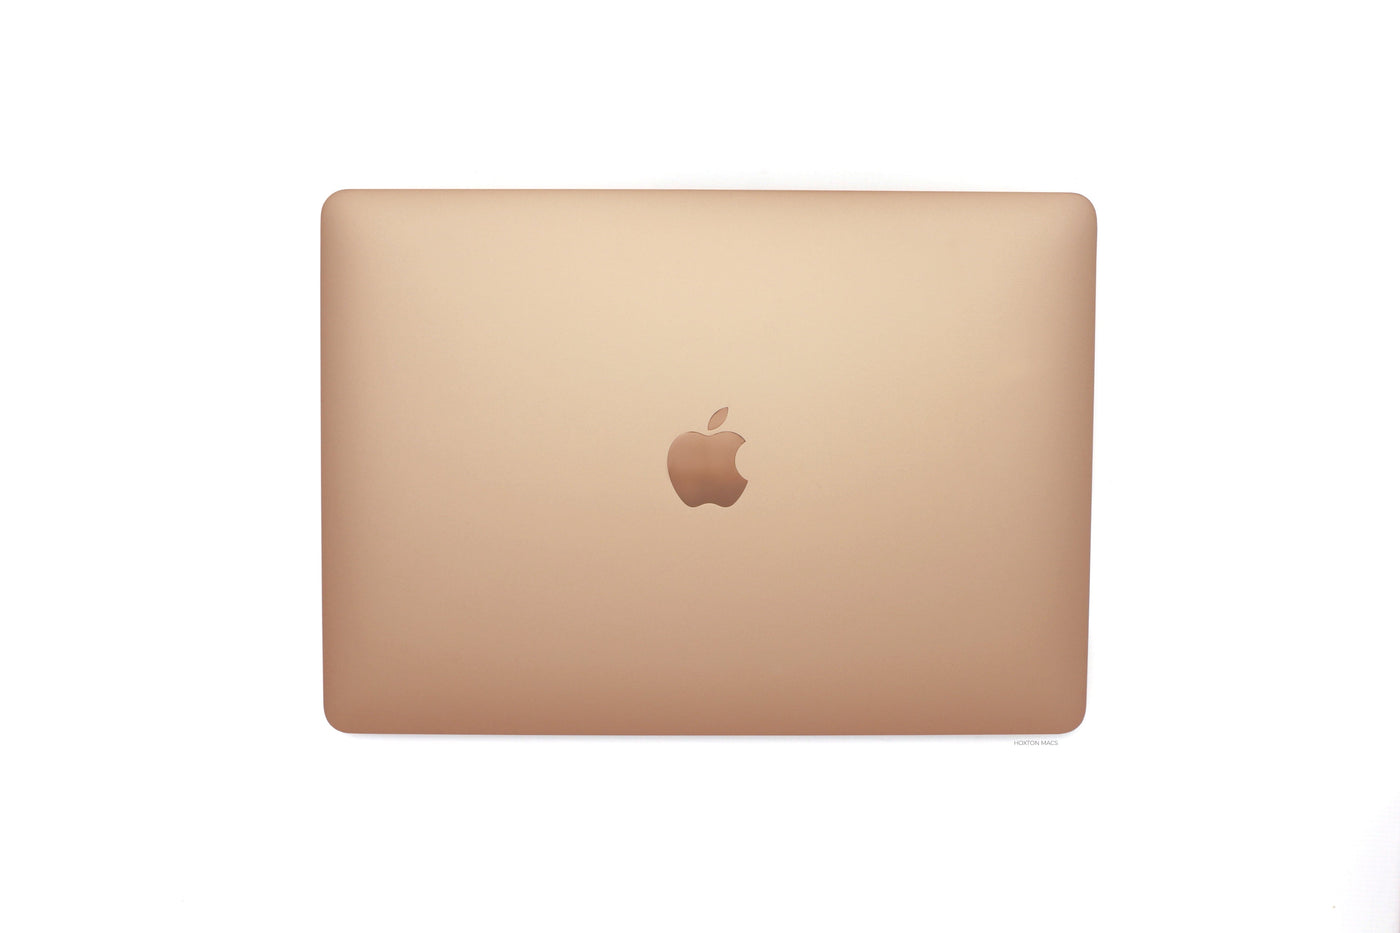 Apple MacBook Air 13-inch MacBook Air 13-inch Core i7 1.2GHz (Gold, 2020) - Excellent